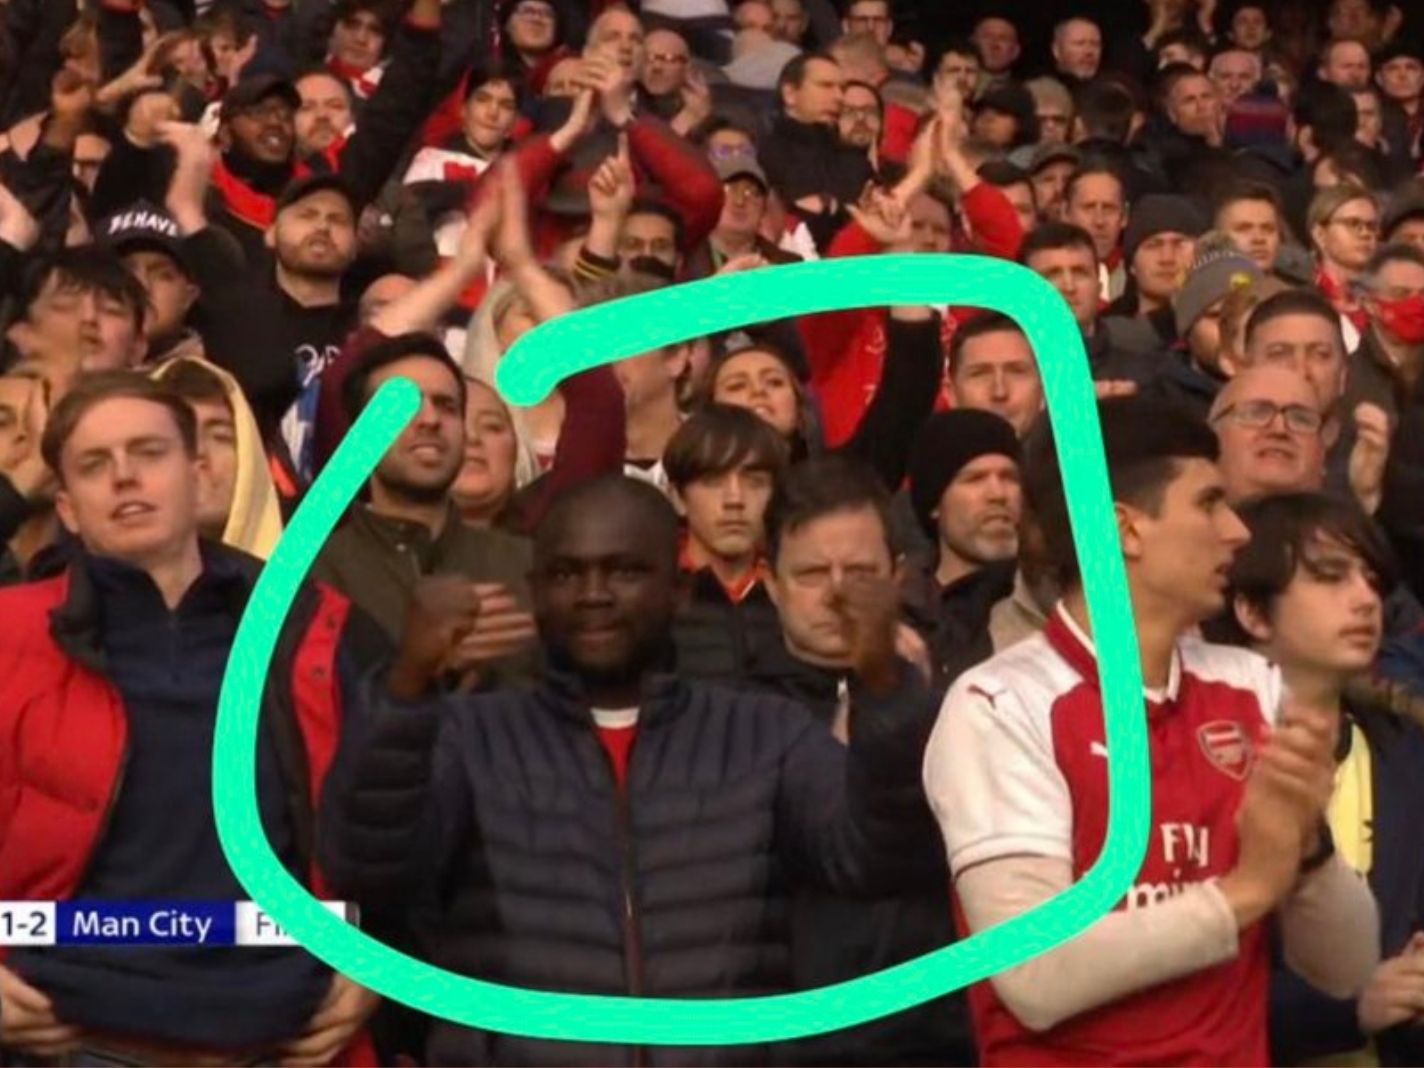 Arsenal fan spotted fist-pumping after Man City defeat? – Here’s the truth